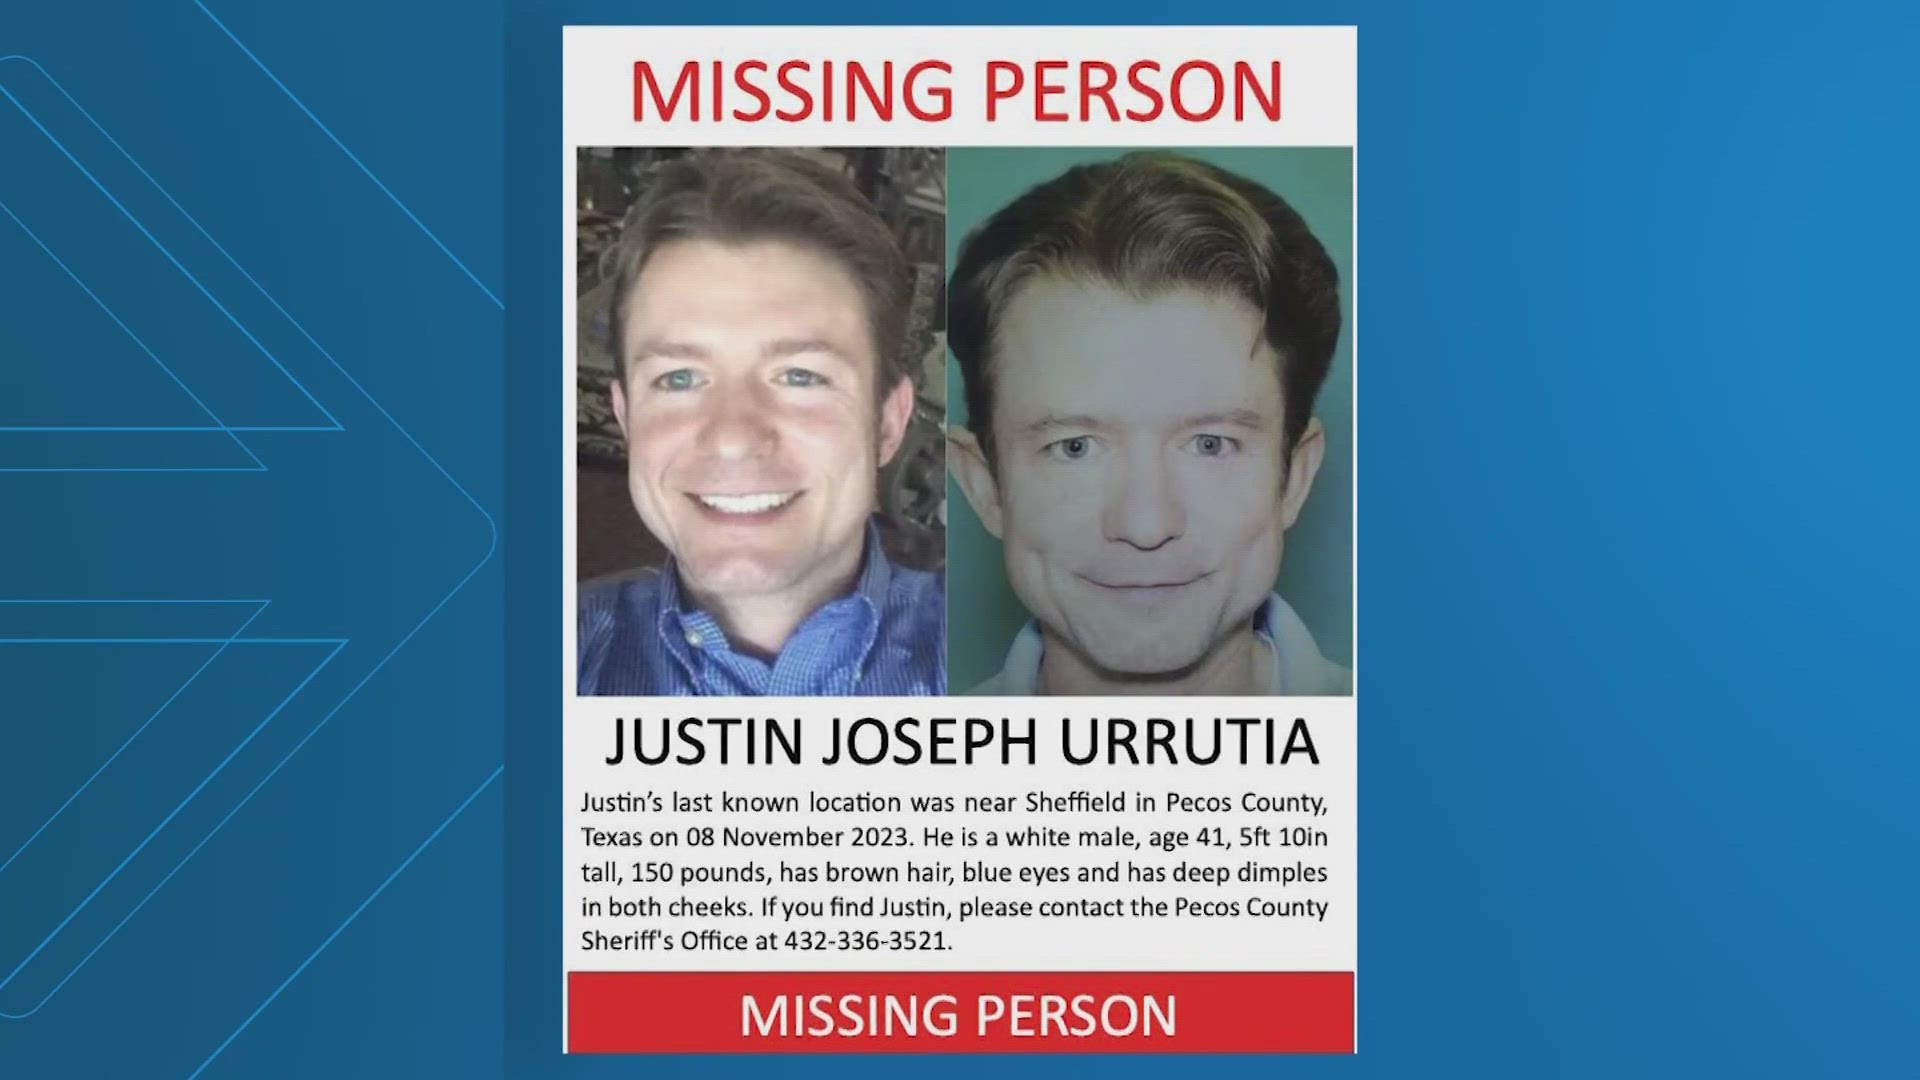 The mother of a Sugar Land man who has been missing since November is asking for help finding her son Justin Urrutia.